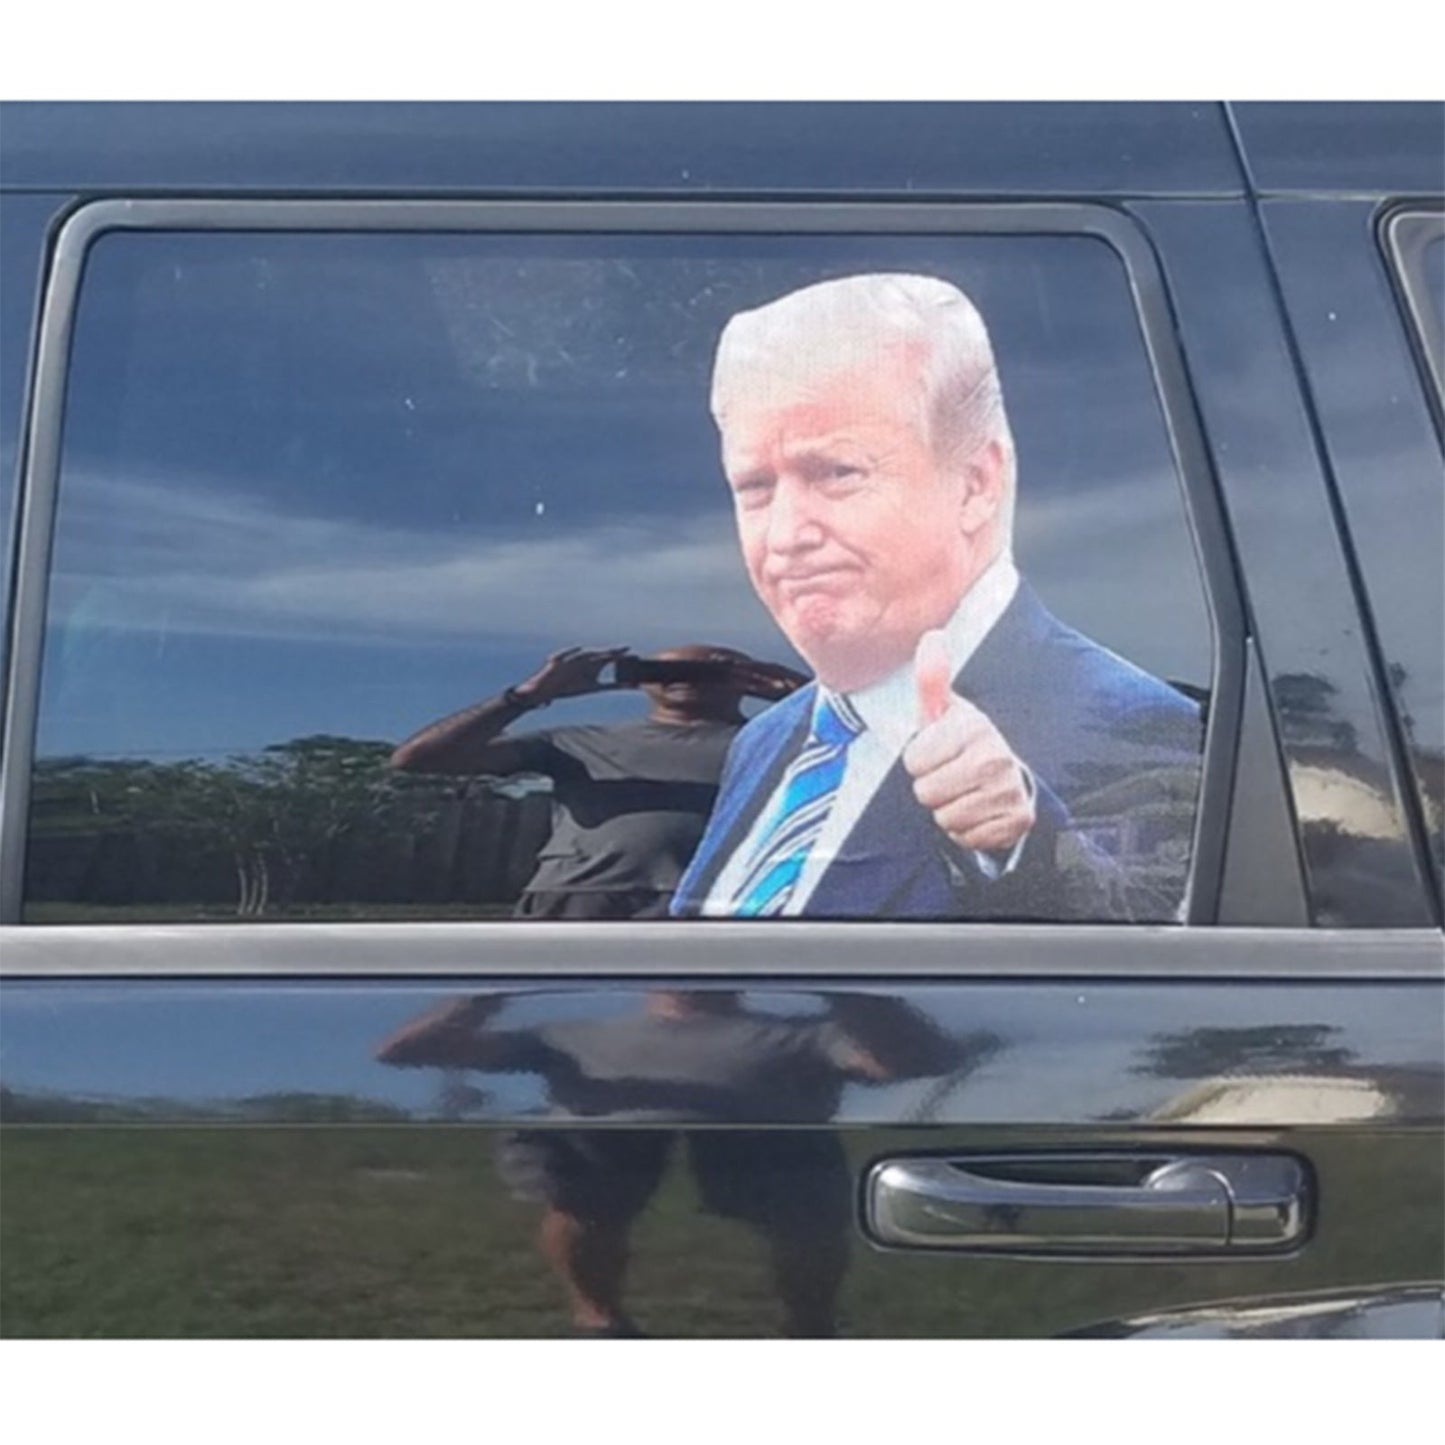 2020 Auto Person Decal Trump Presidential Election Front Left Window